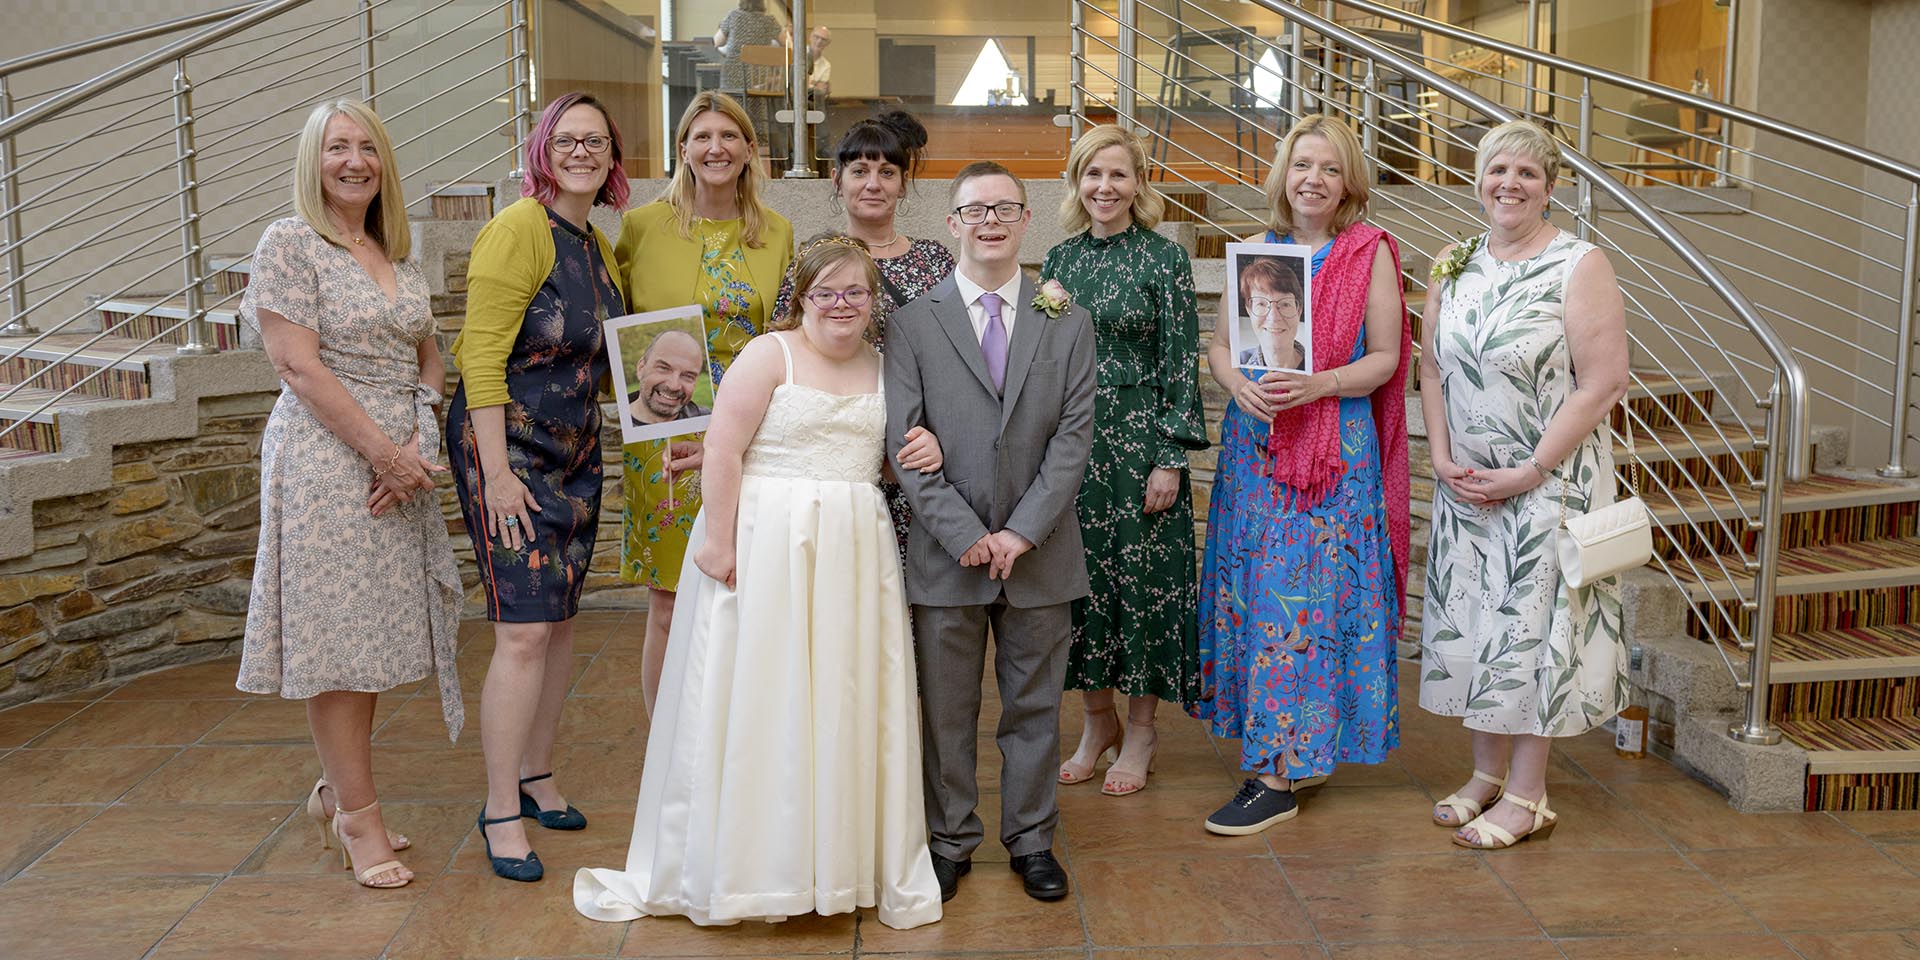 James Heidi wedding Coventry Down syndrome don't screen us out activist mums